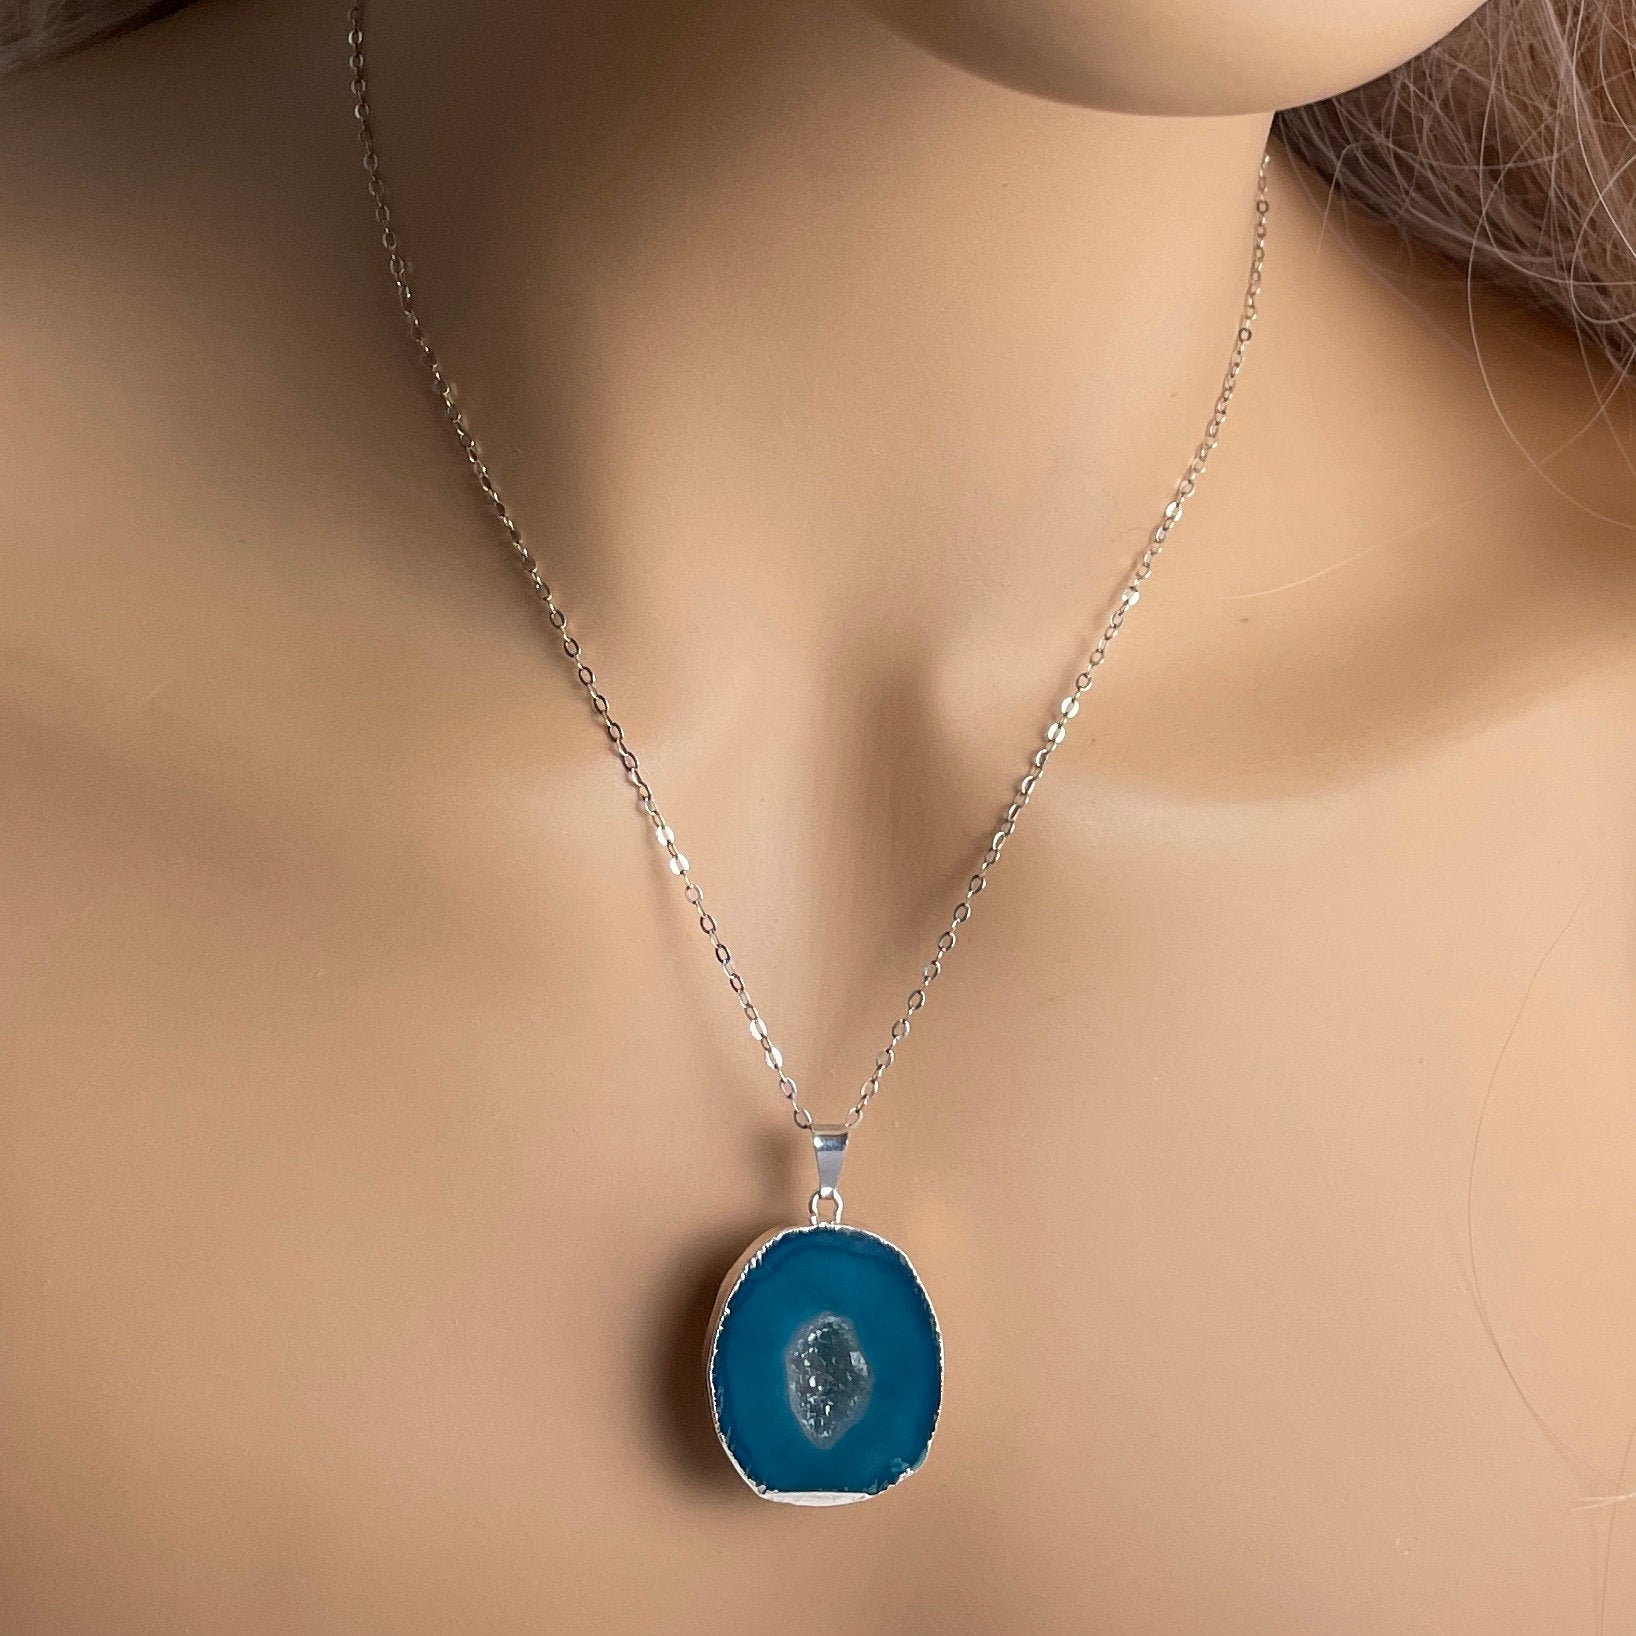 Mom Gift - Small Geode Necklace Silver